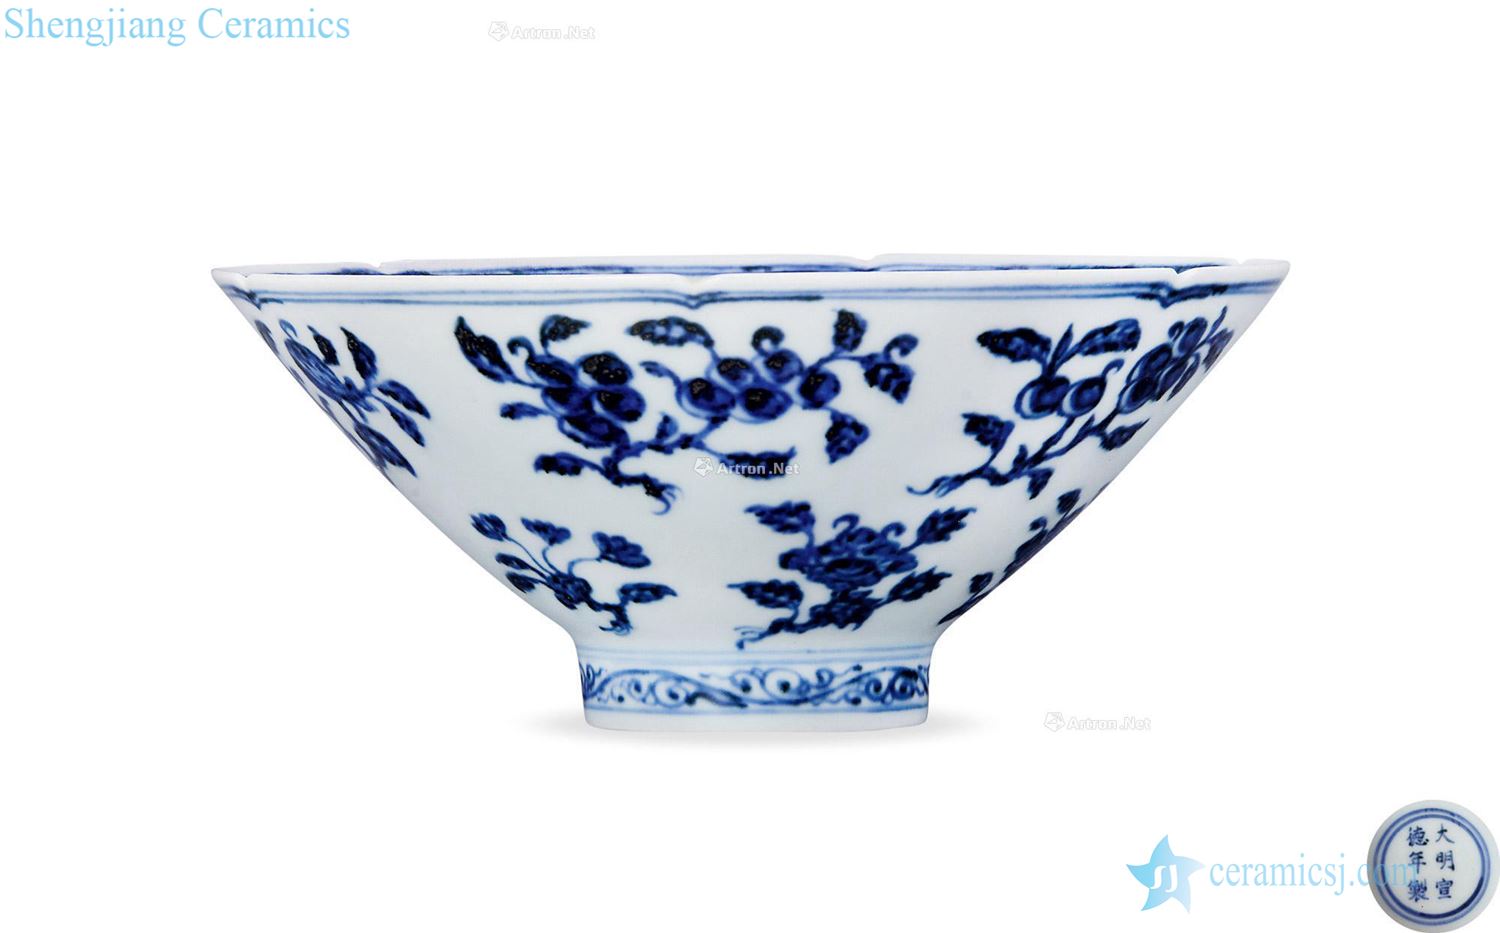 Ming Blue and white ruffled branch kwai mouth bowl